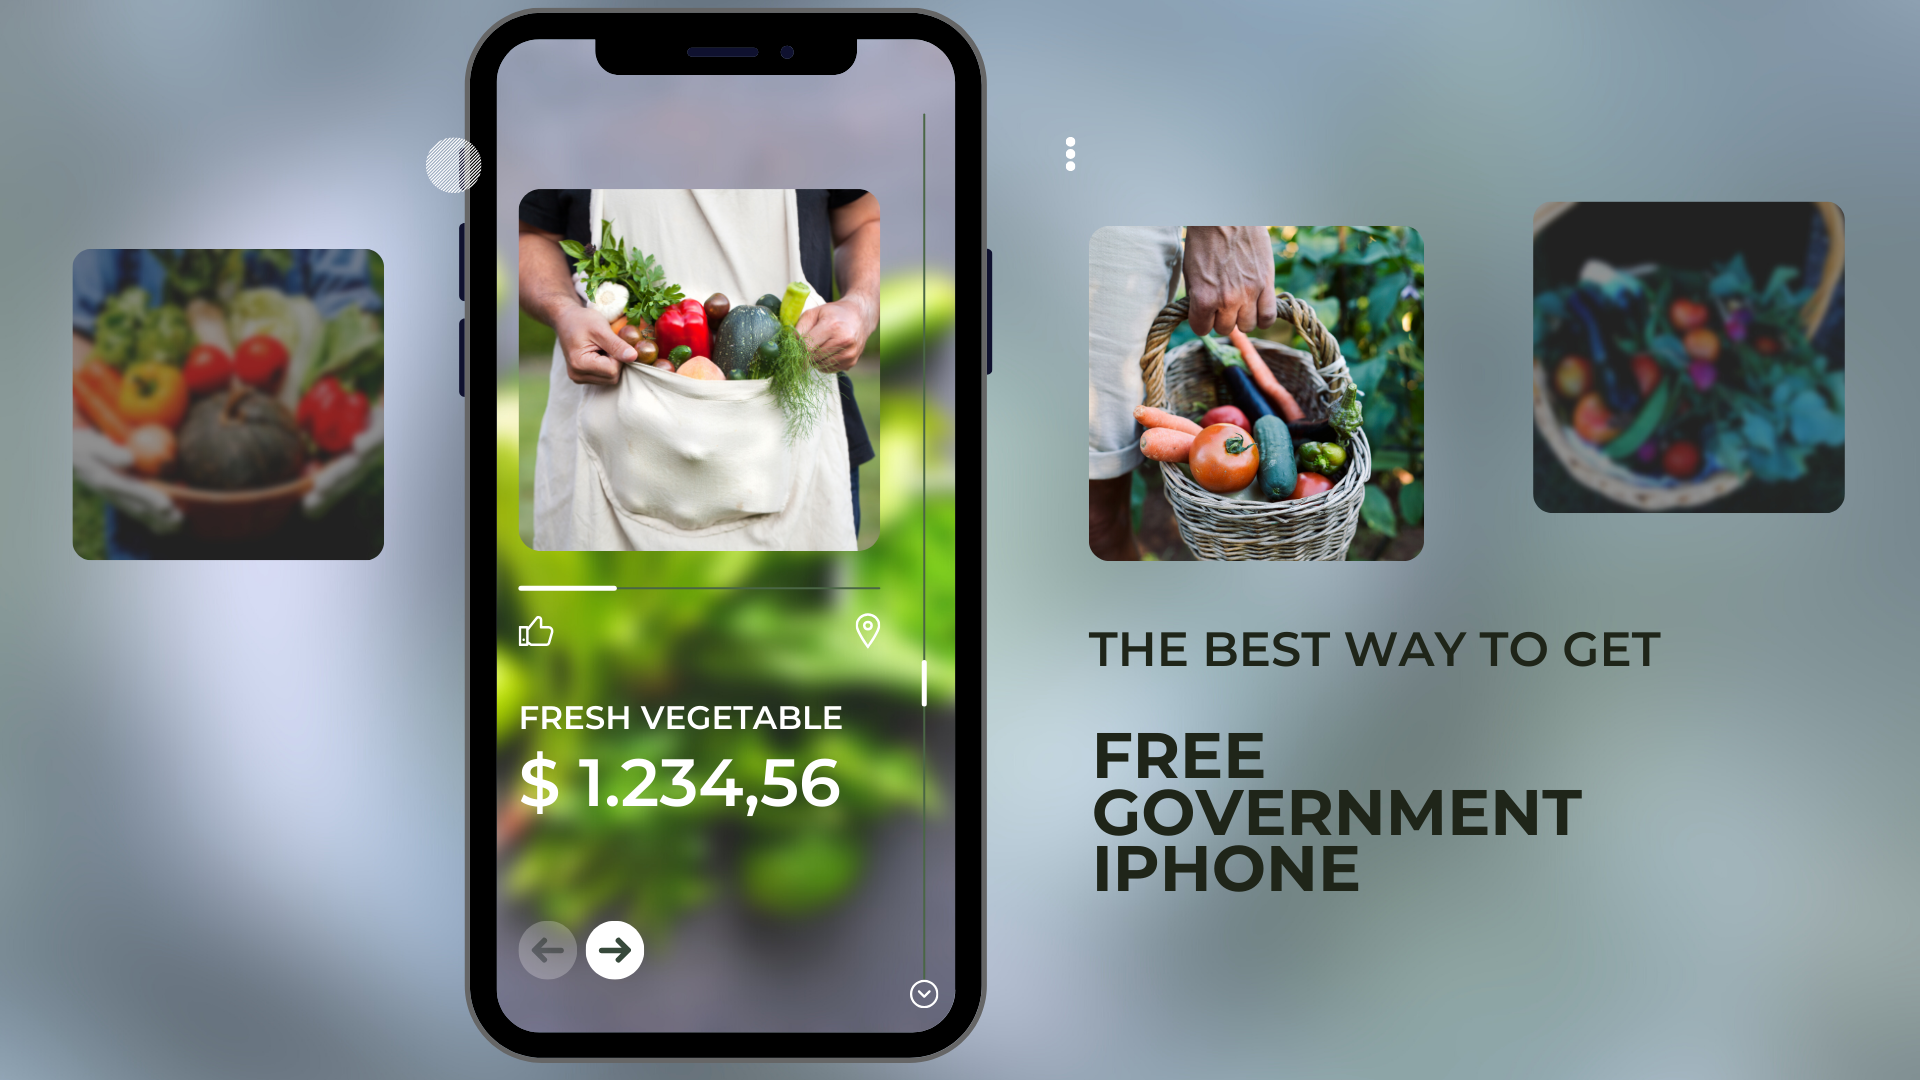 Free Government Iphone: What is Free Government Iphone and The best way to get Iphone 15 for Free